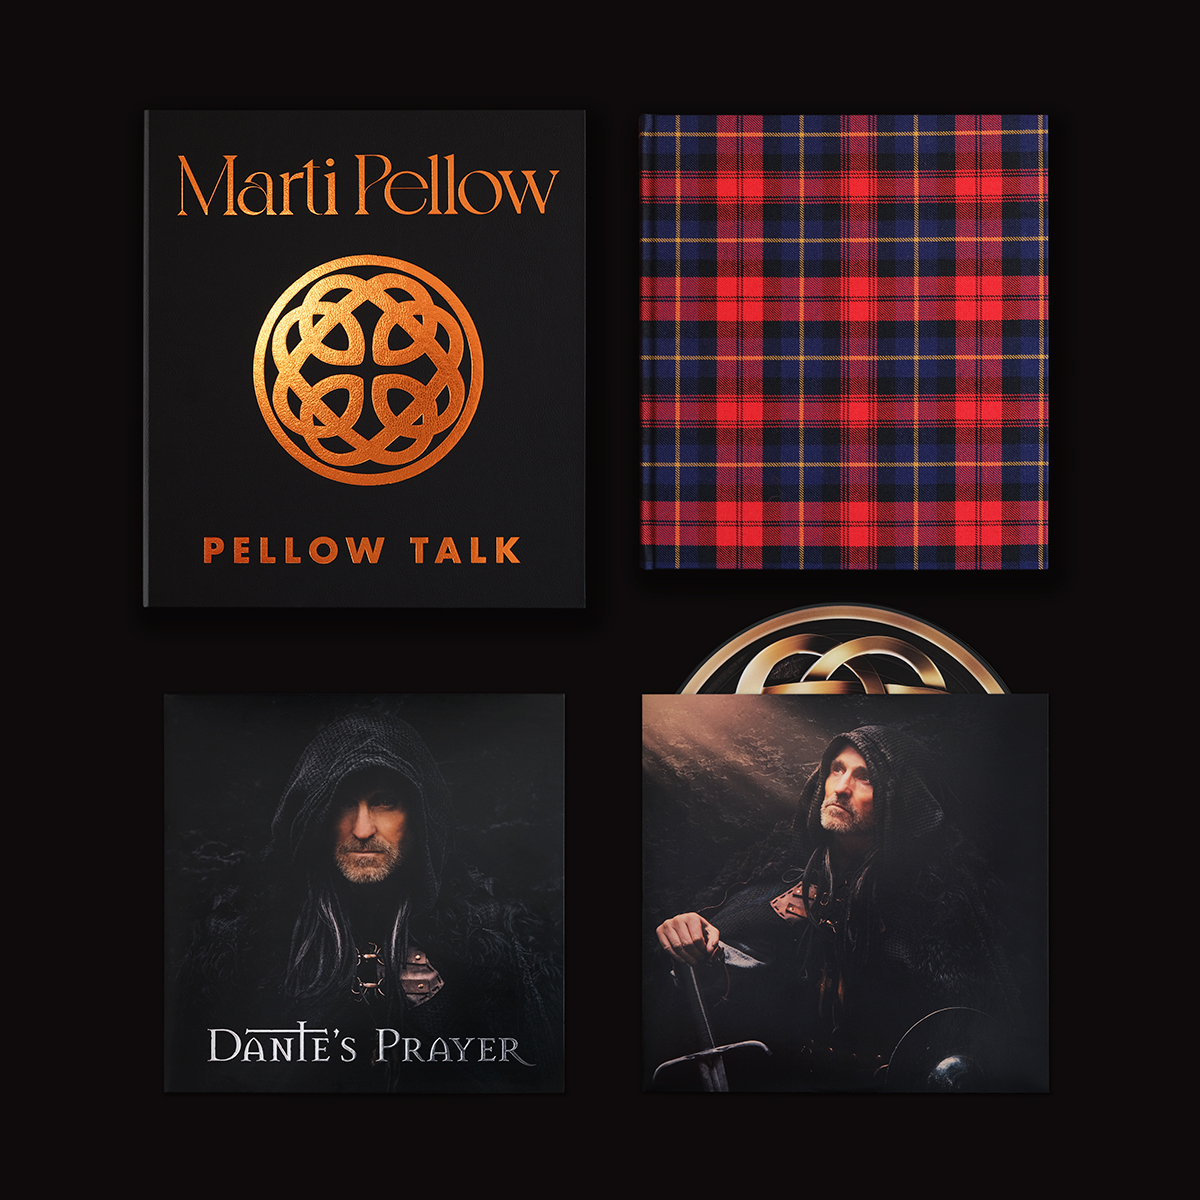 Marti Pellow - Pellow Talk Limited Edition (400 copies only)